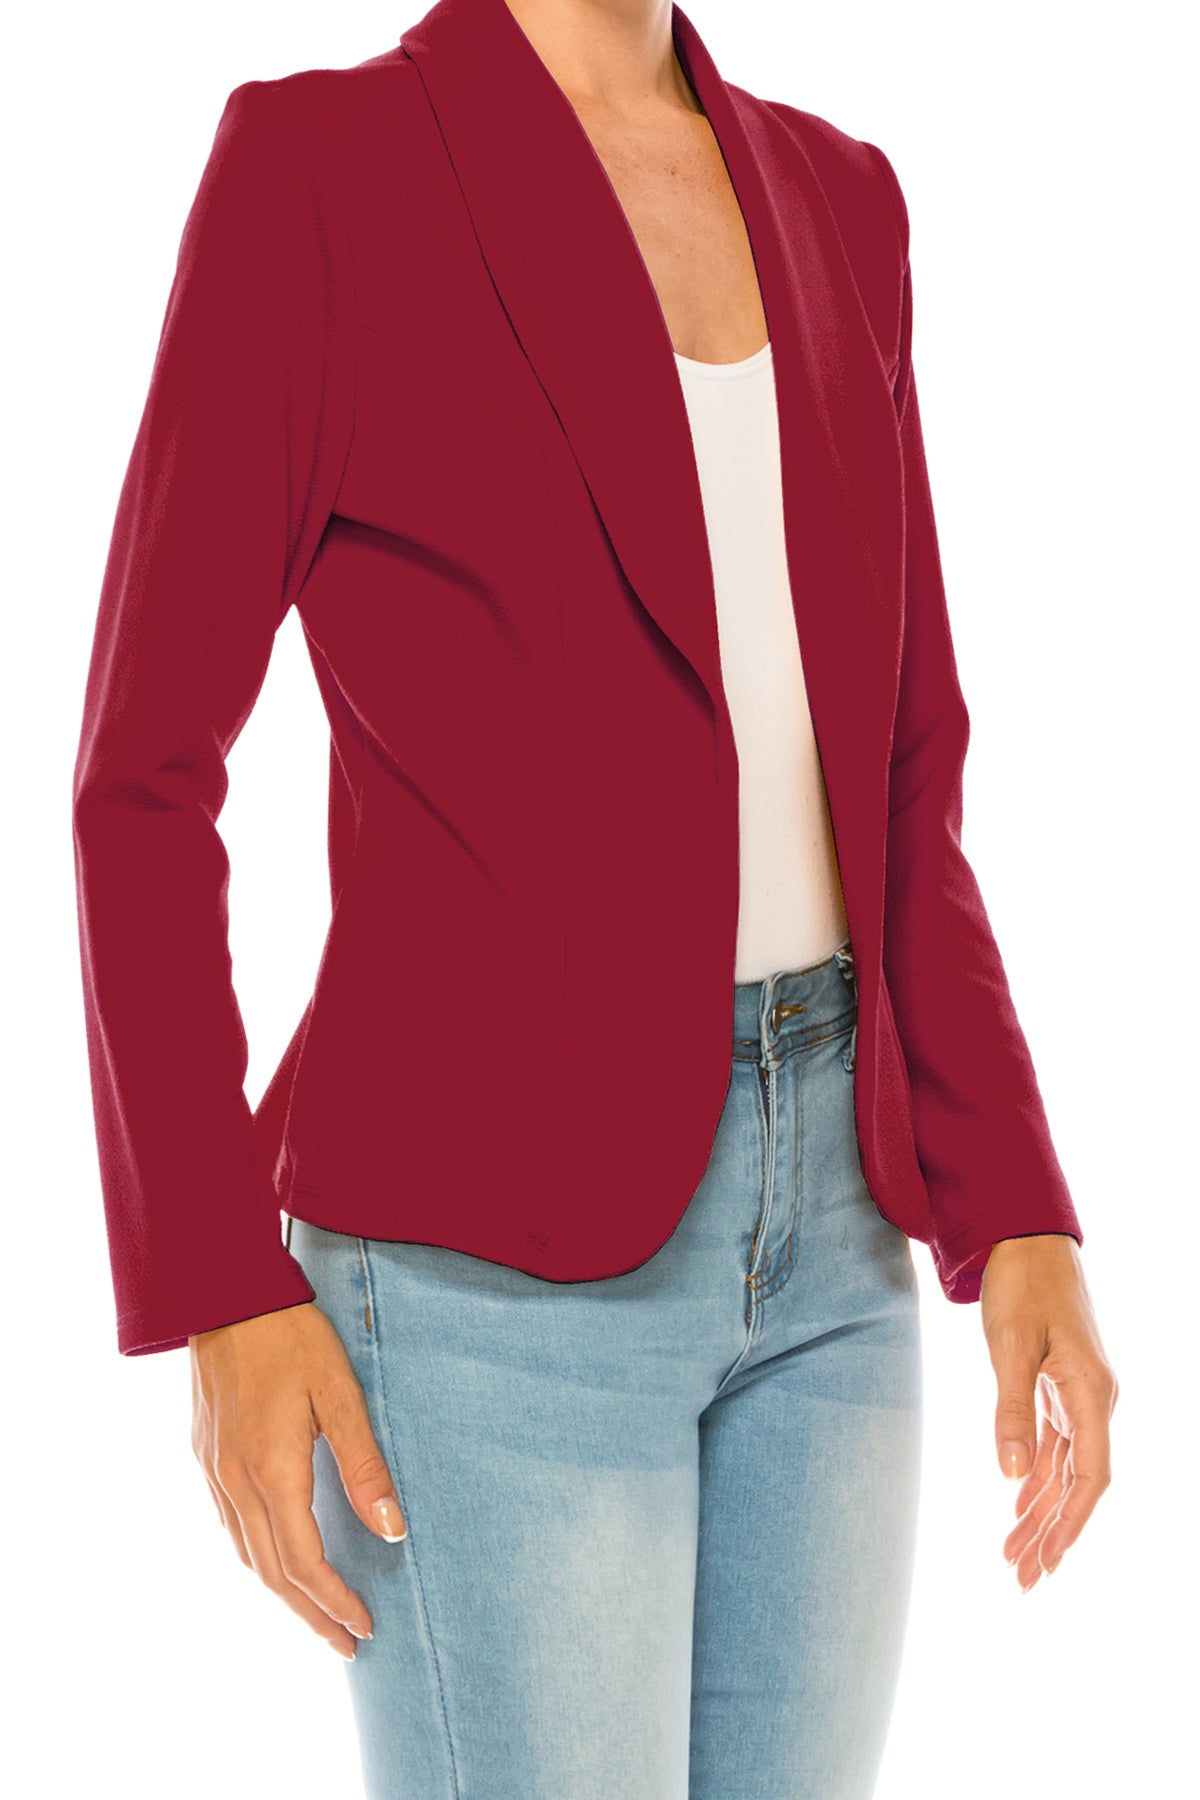 Women's Casual Solid Office Work Long Sleeve Fitted Blazer Jacket